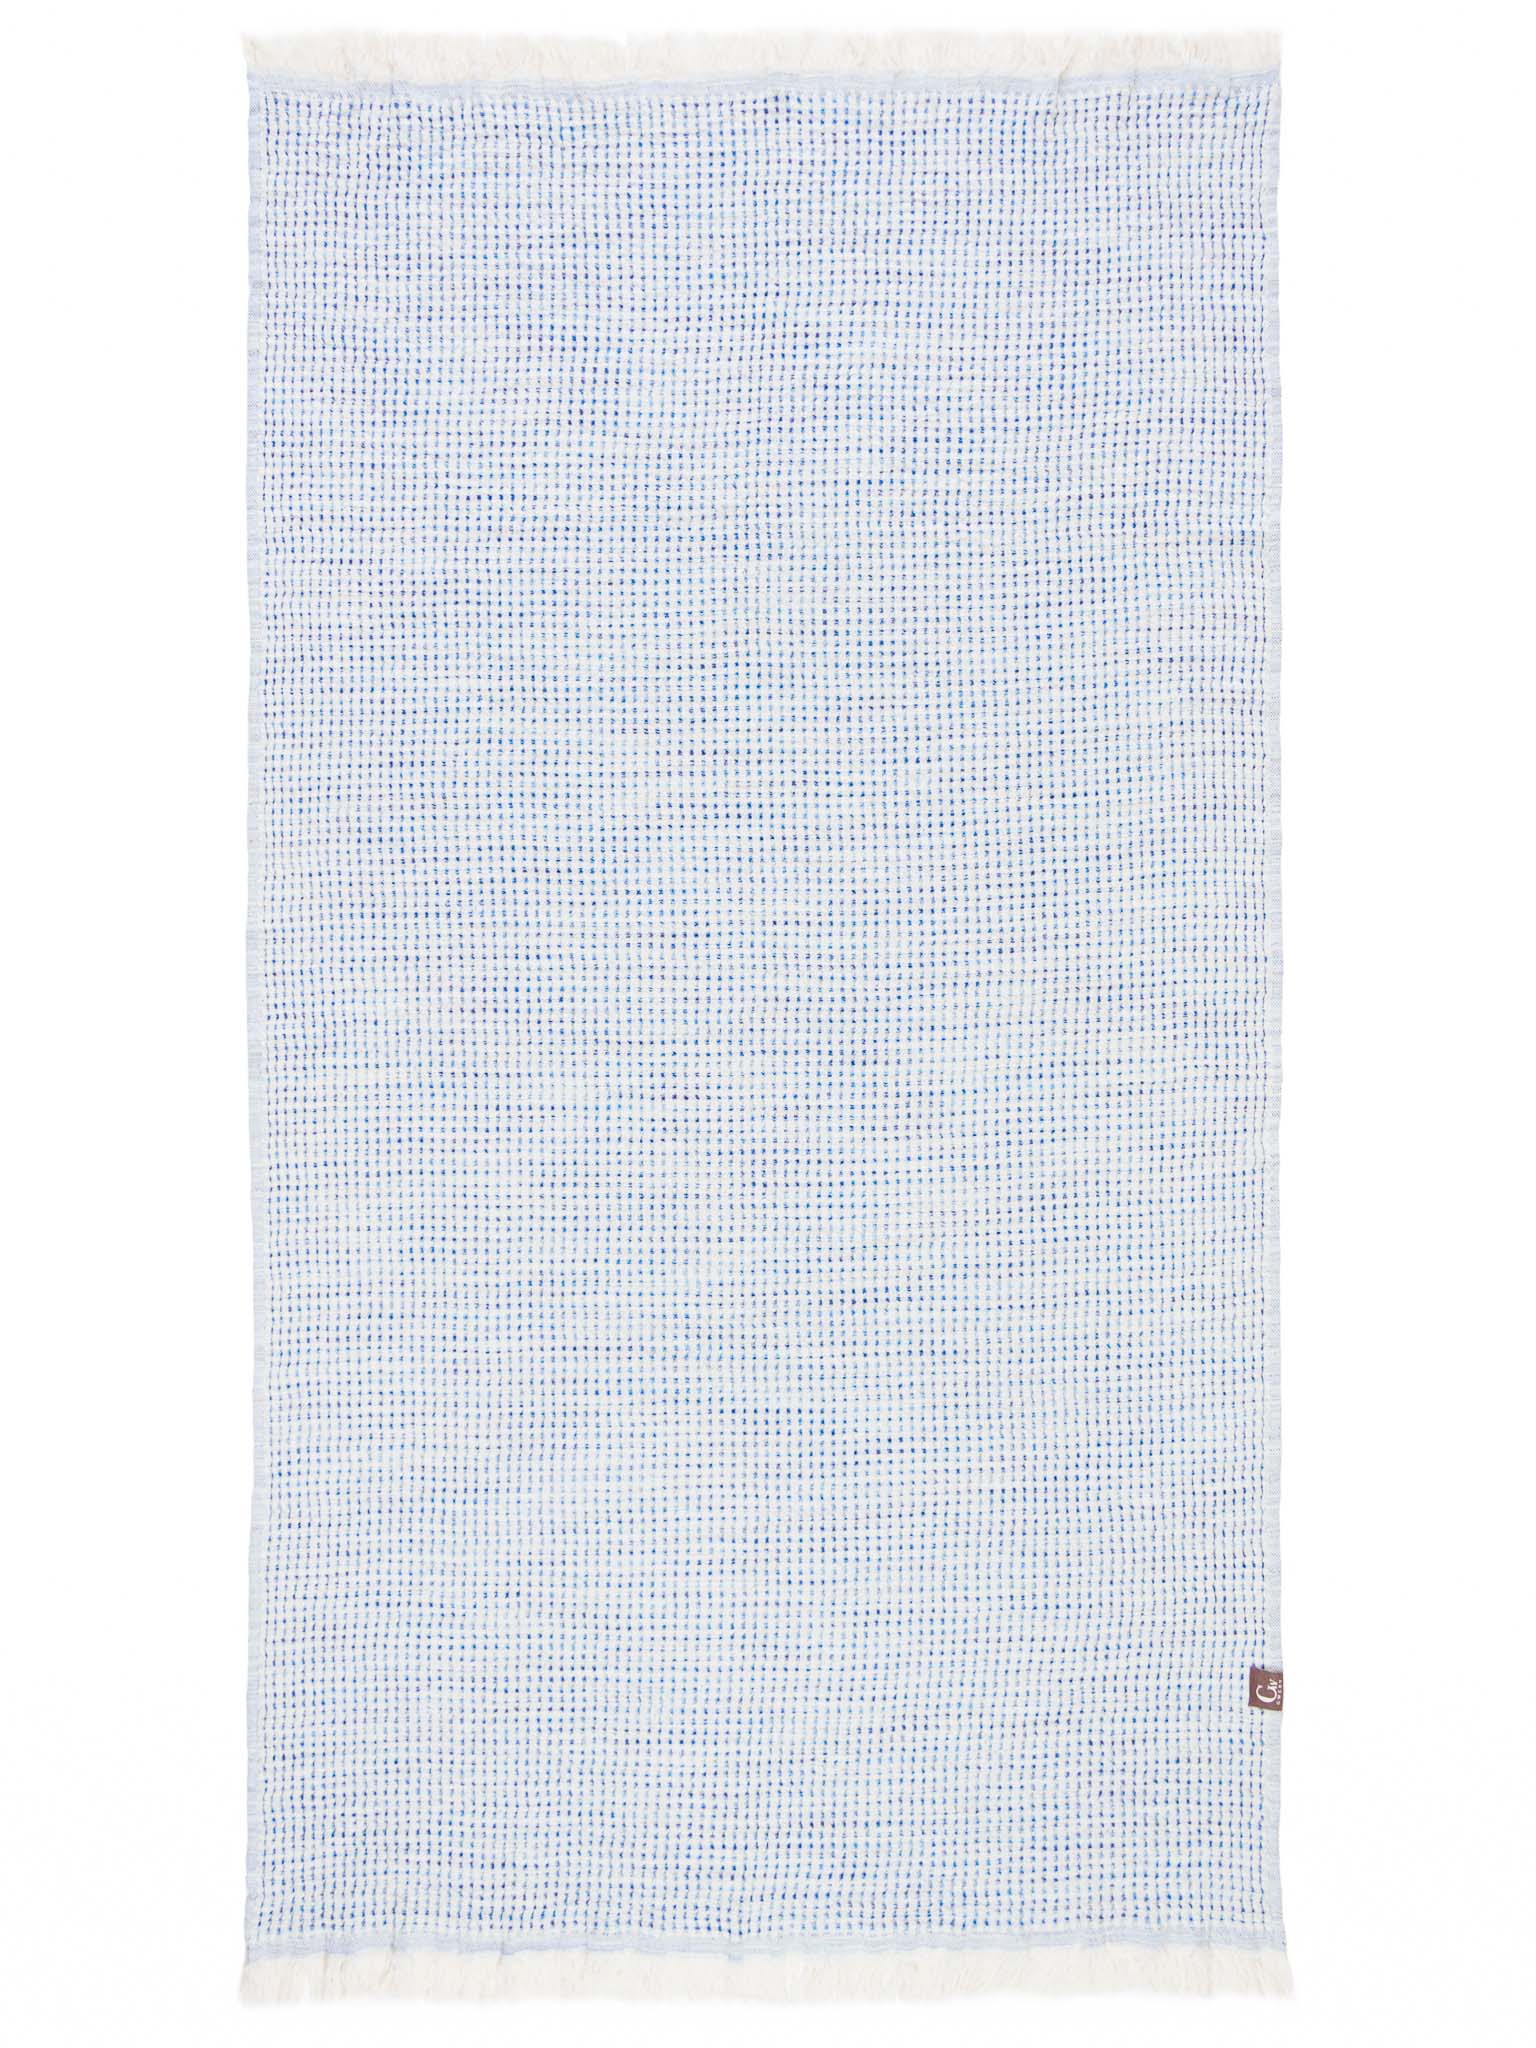 Blue patterned, double sided, honeycomb beach towel open up